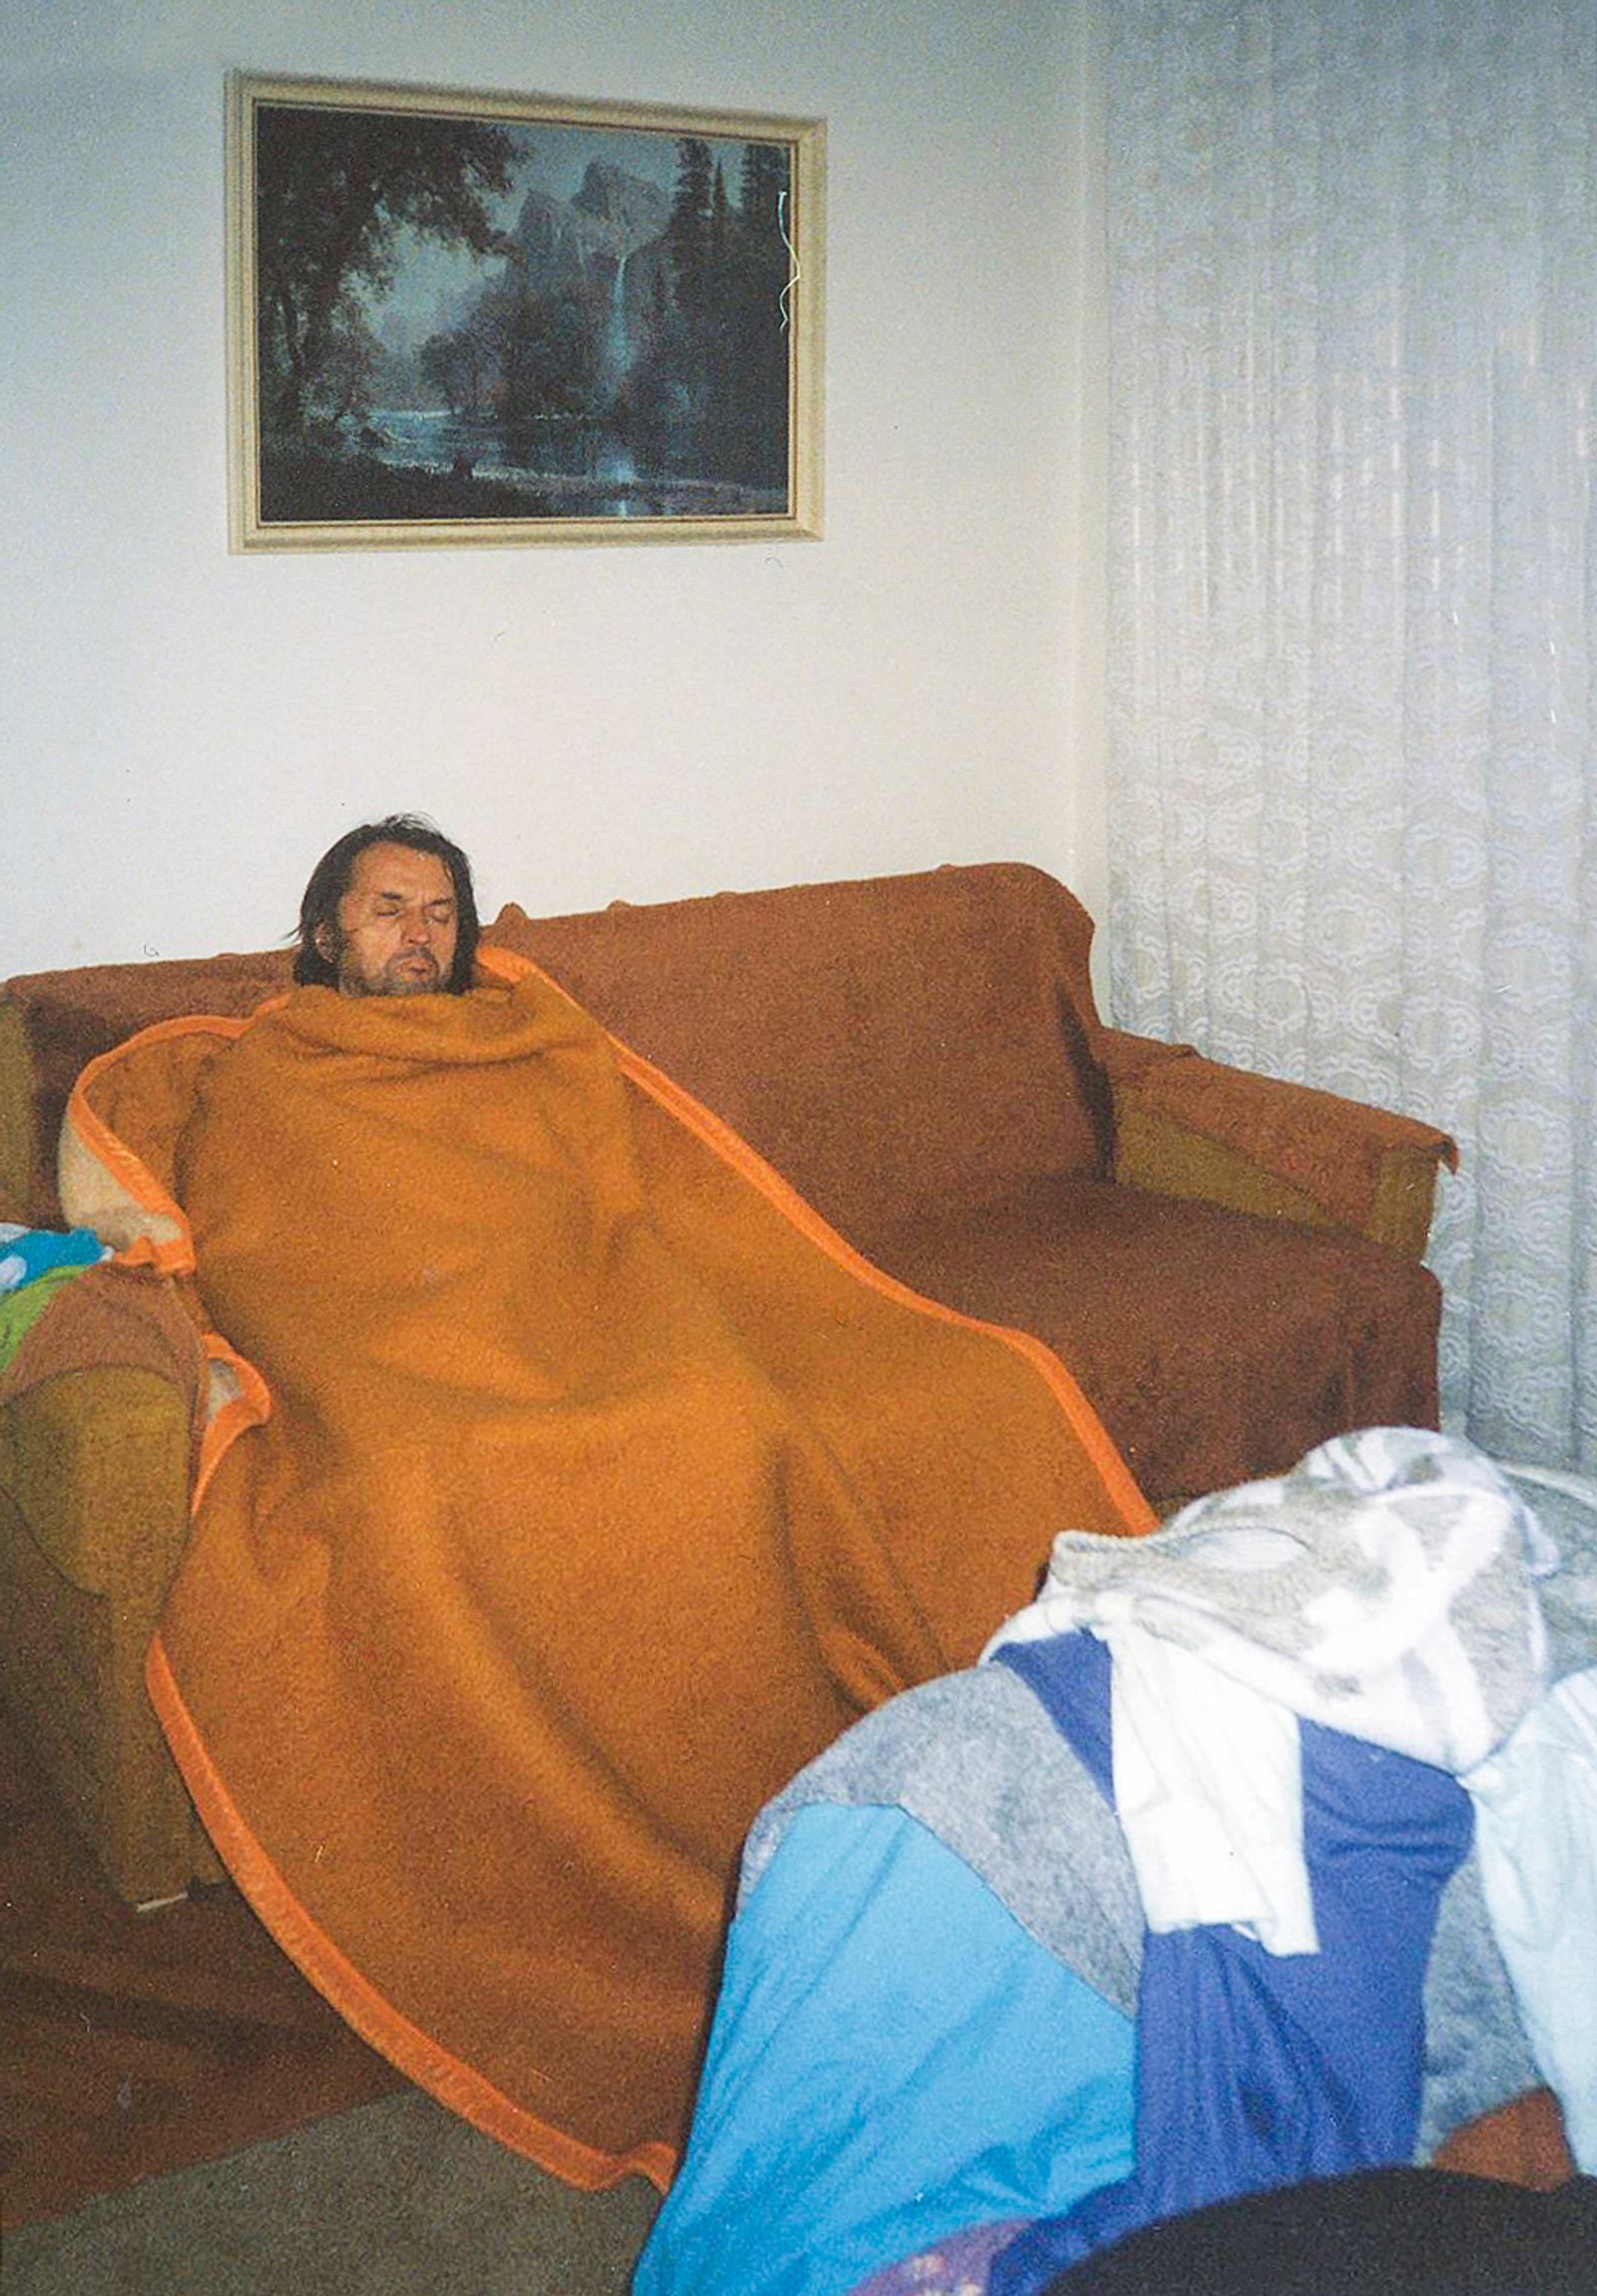 © Lucija Rosc - An archival picture of my grandfather sleeping on the couch.